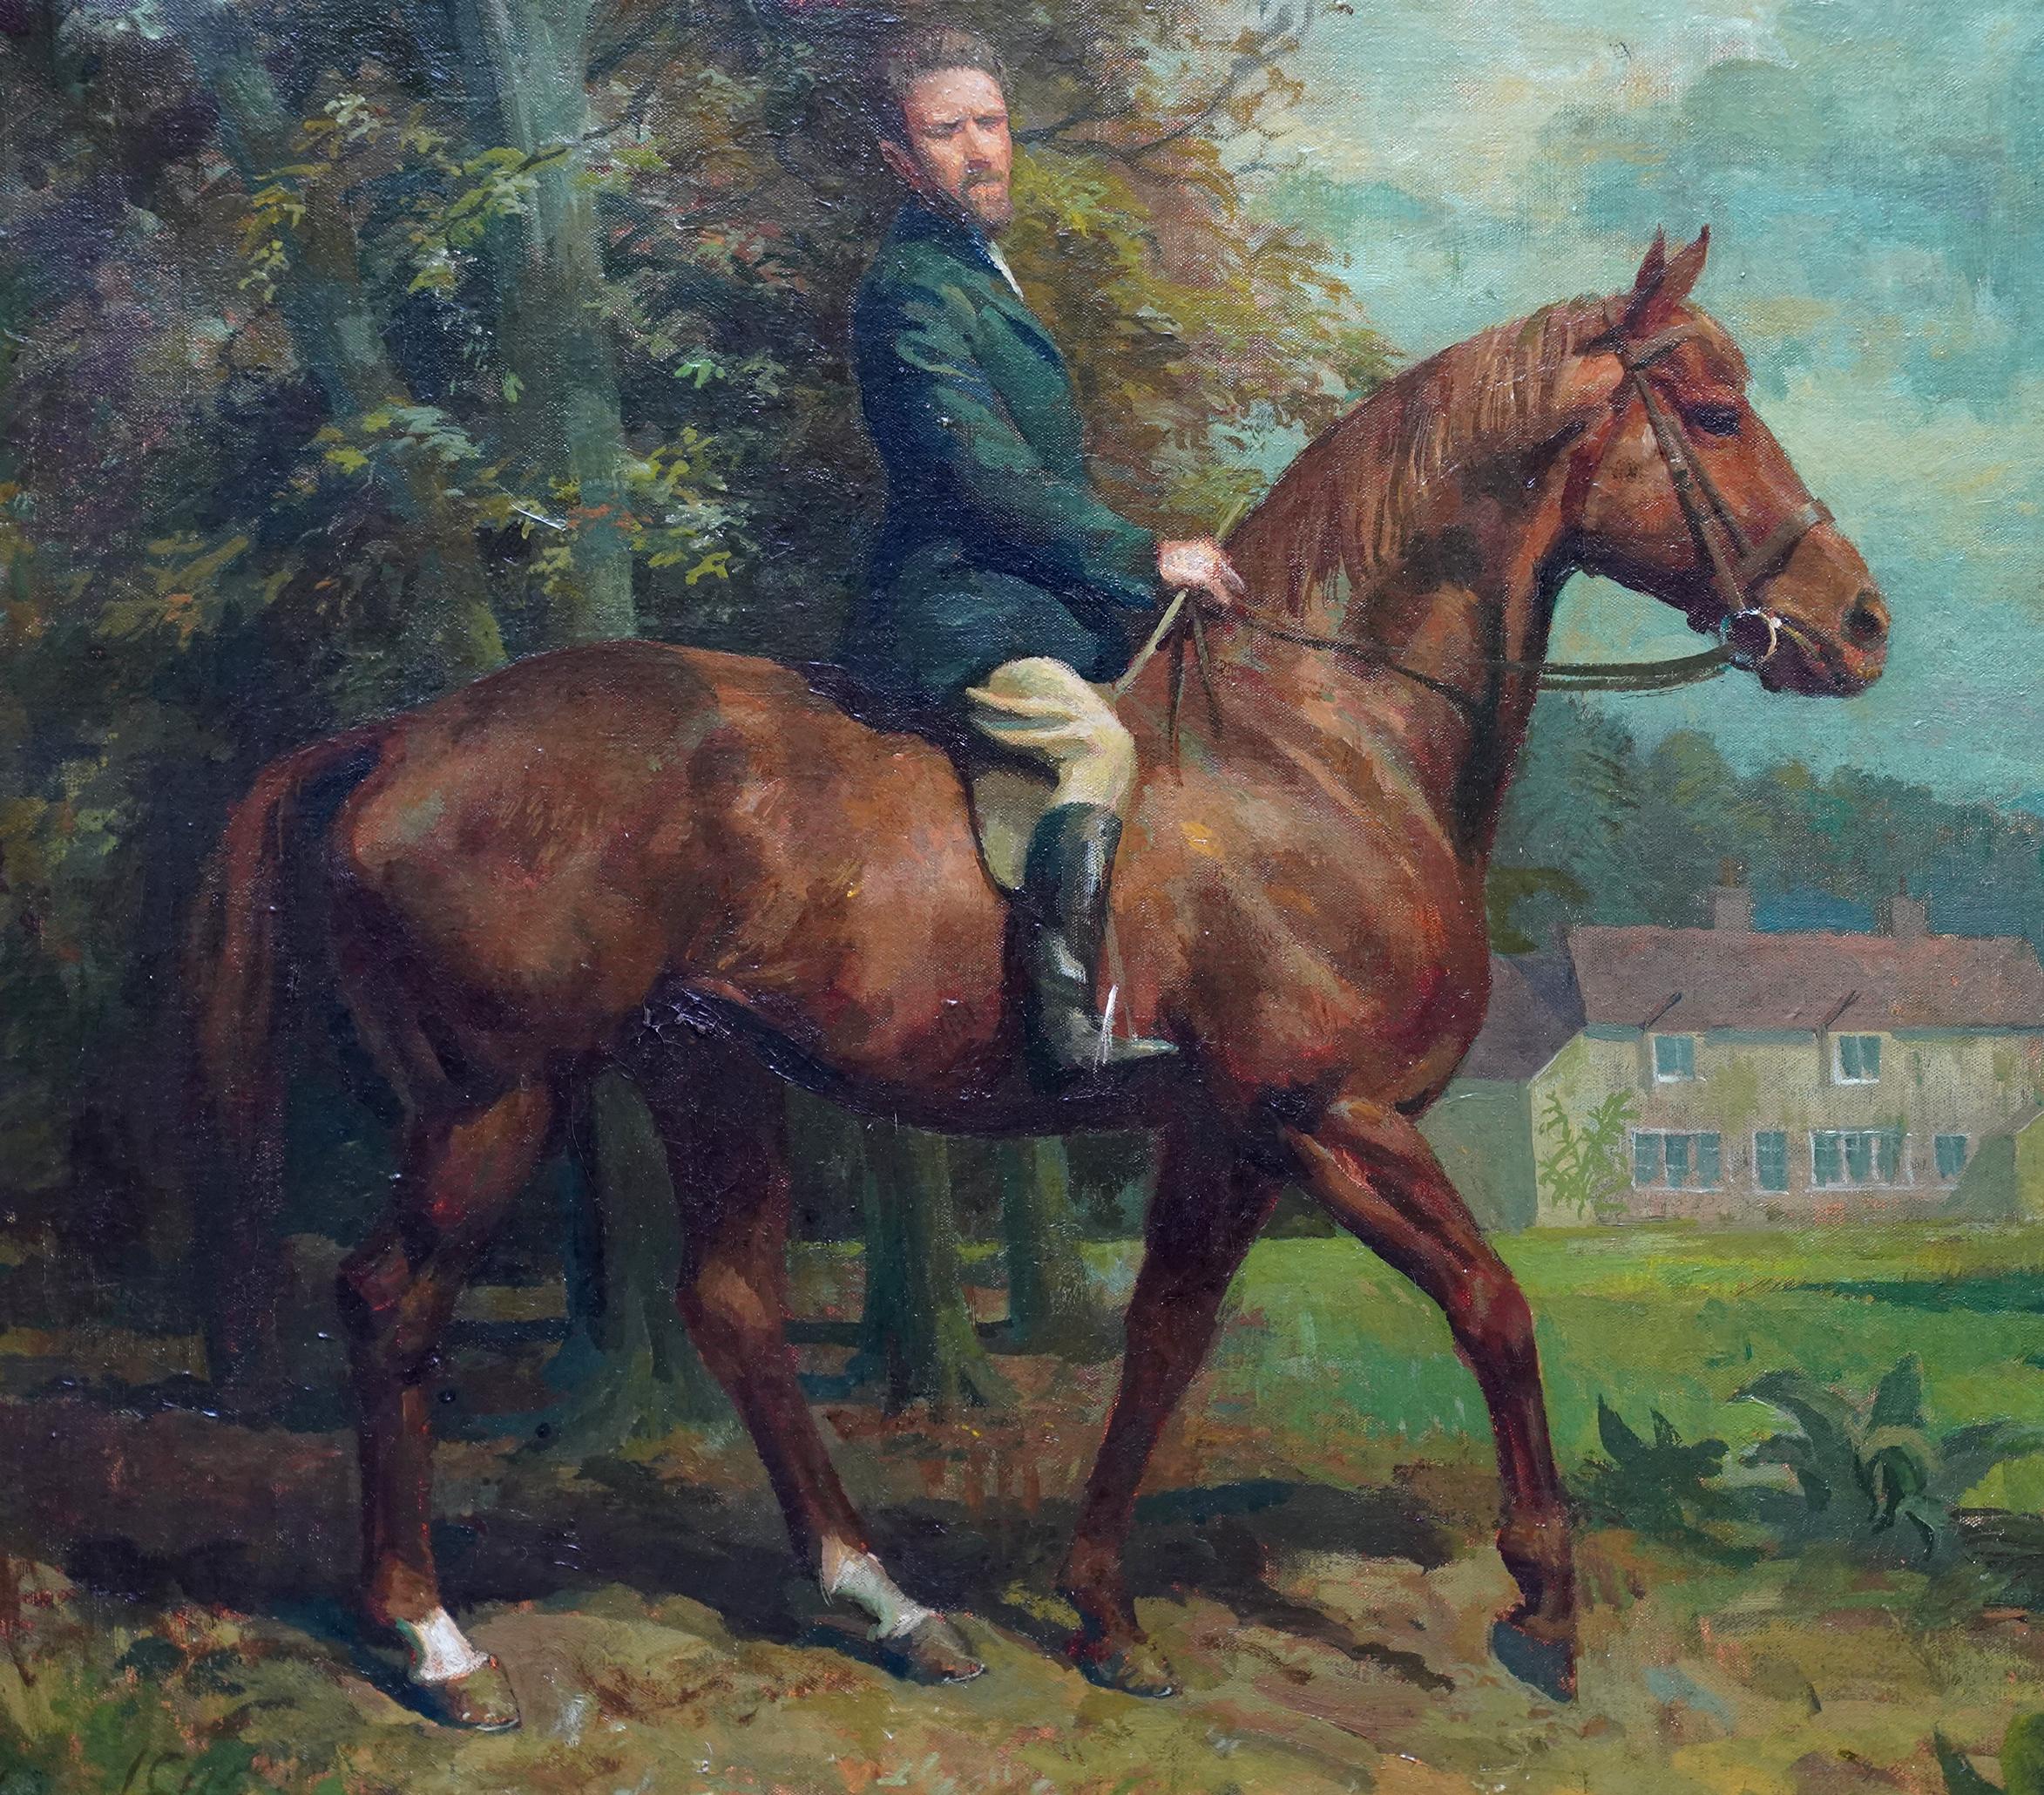 This lovely portrait oil painting is by noted British artist Lionel Ellis. Painted in 1955 the painting is a self portrait of the artist on a beautiful chestnut horse in the foreground of a landscape. Beyond him is another horse and some dwellings